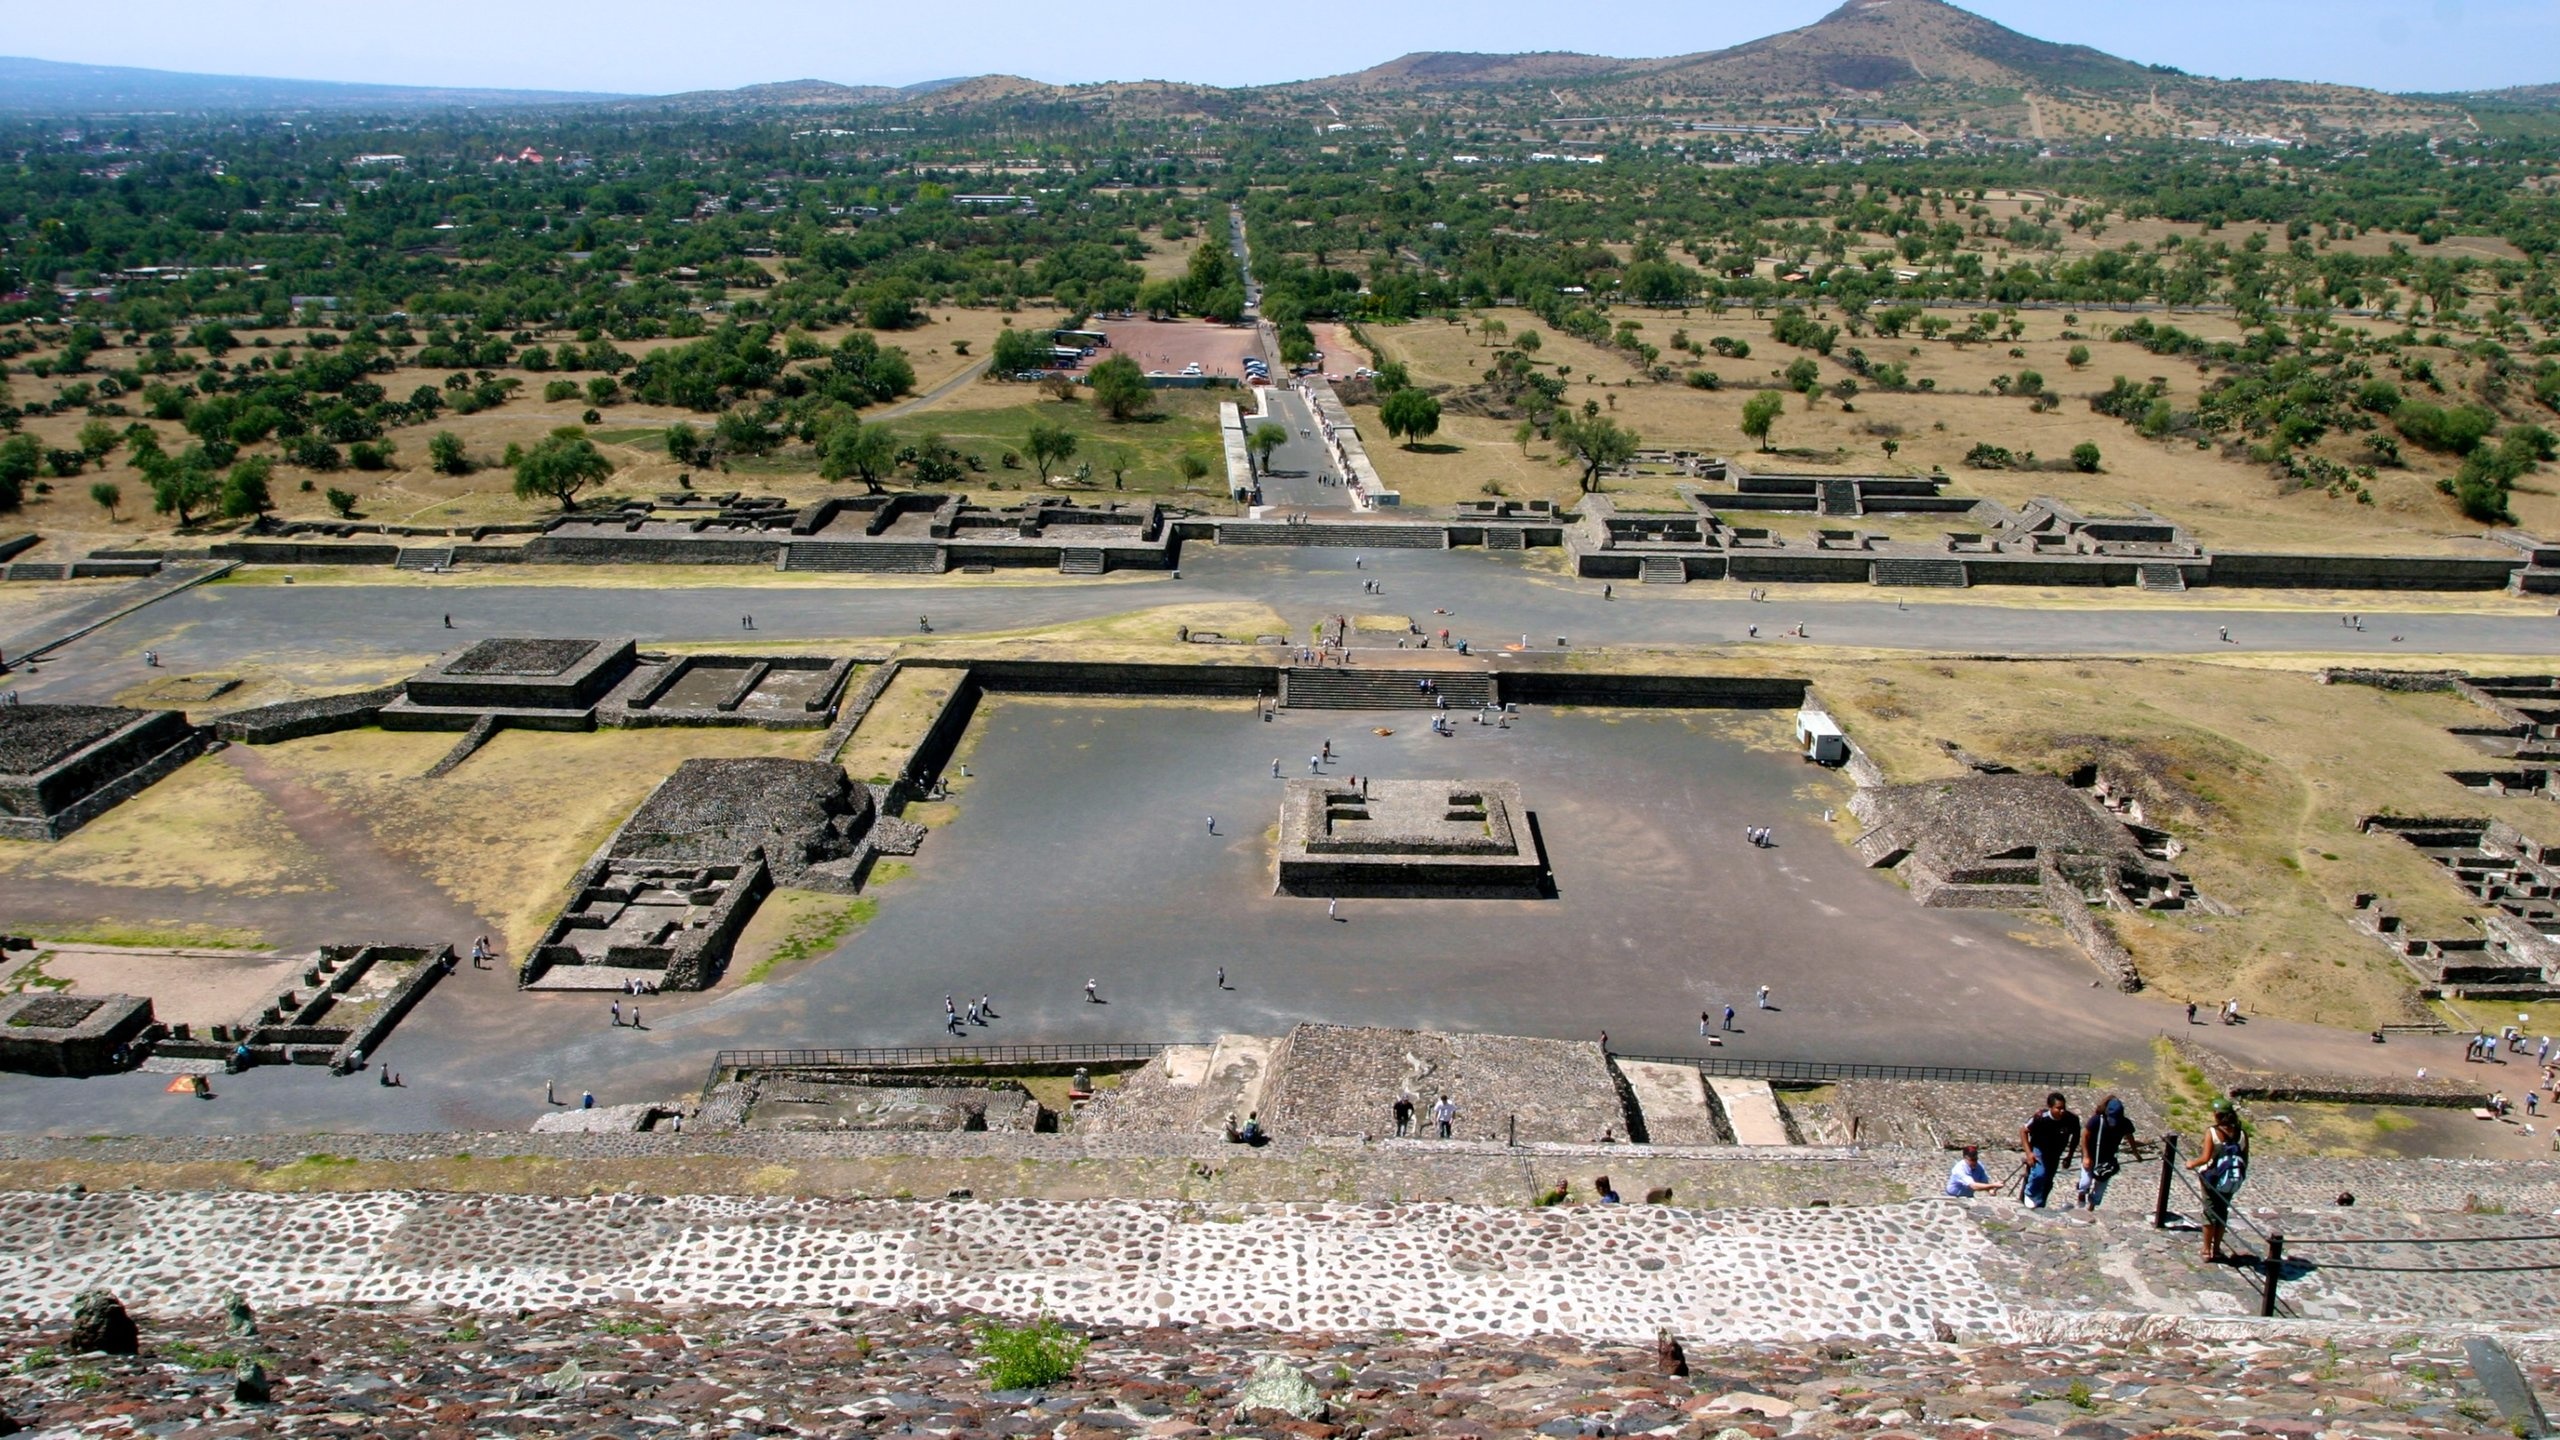 Visit Teotihuacan, Best of Teotihuacan, State of Mexico travel, Exquisite sights, 2560x1440 HD Desktop